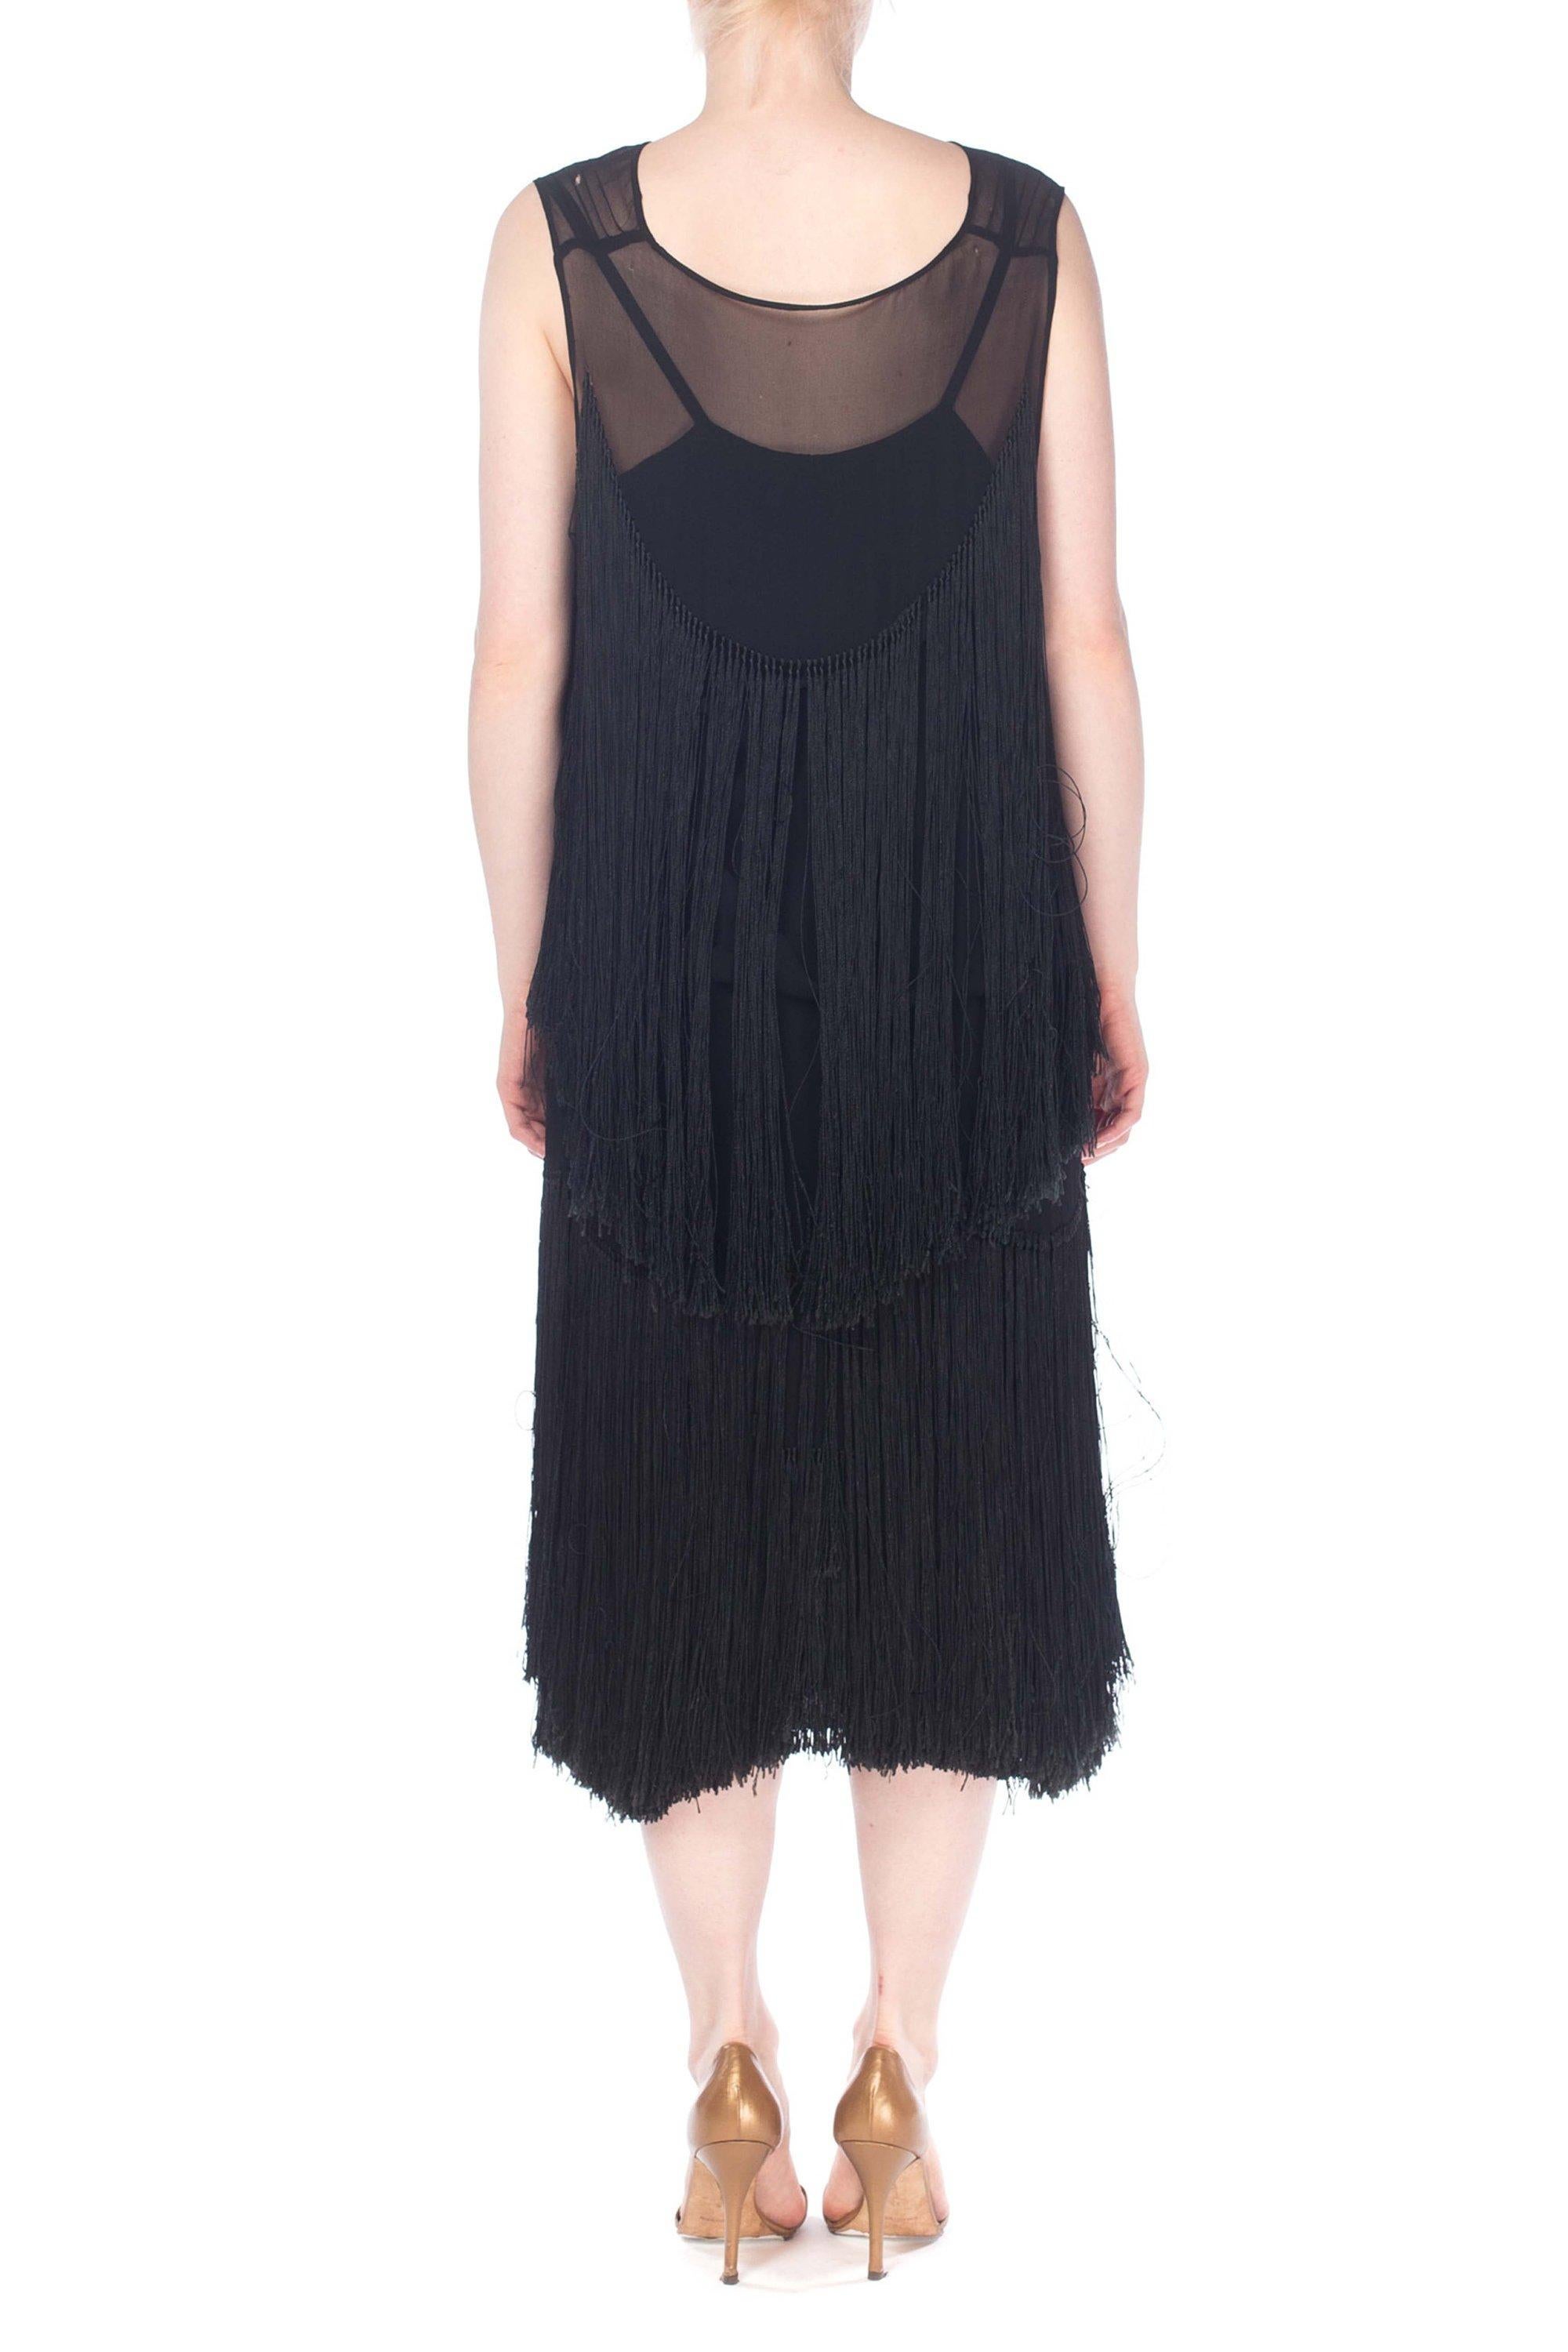 Women's 1920S Black Silk Chiffon Cocktail Dress With Fringe Skirt And Back Cape